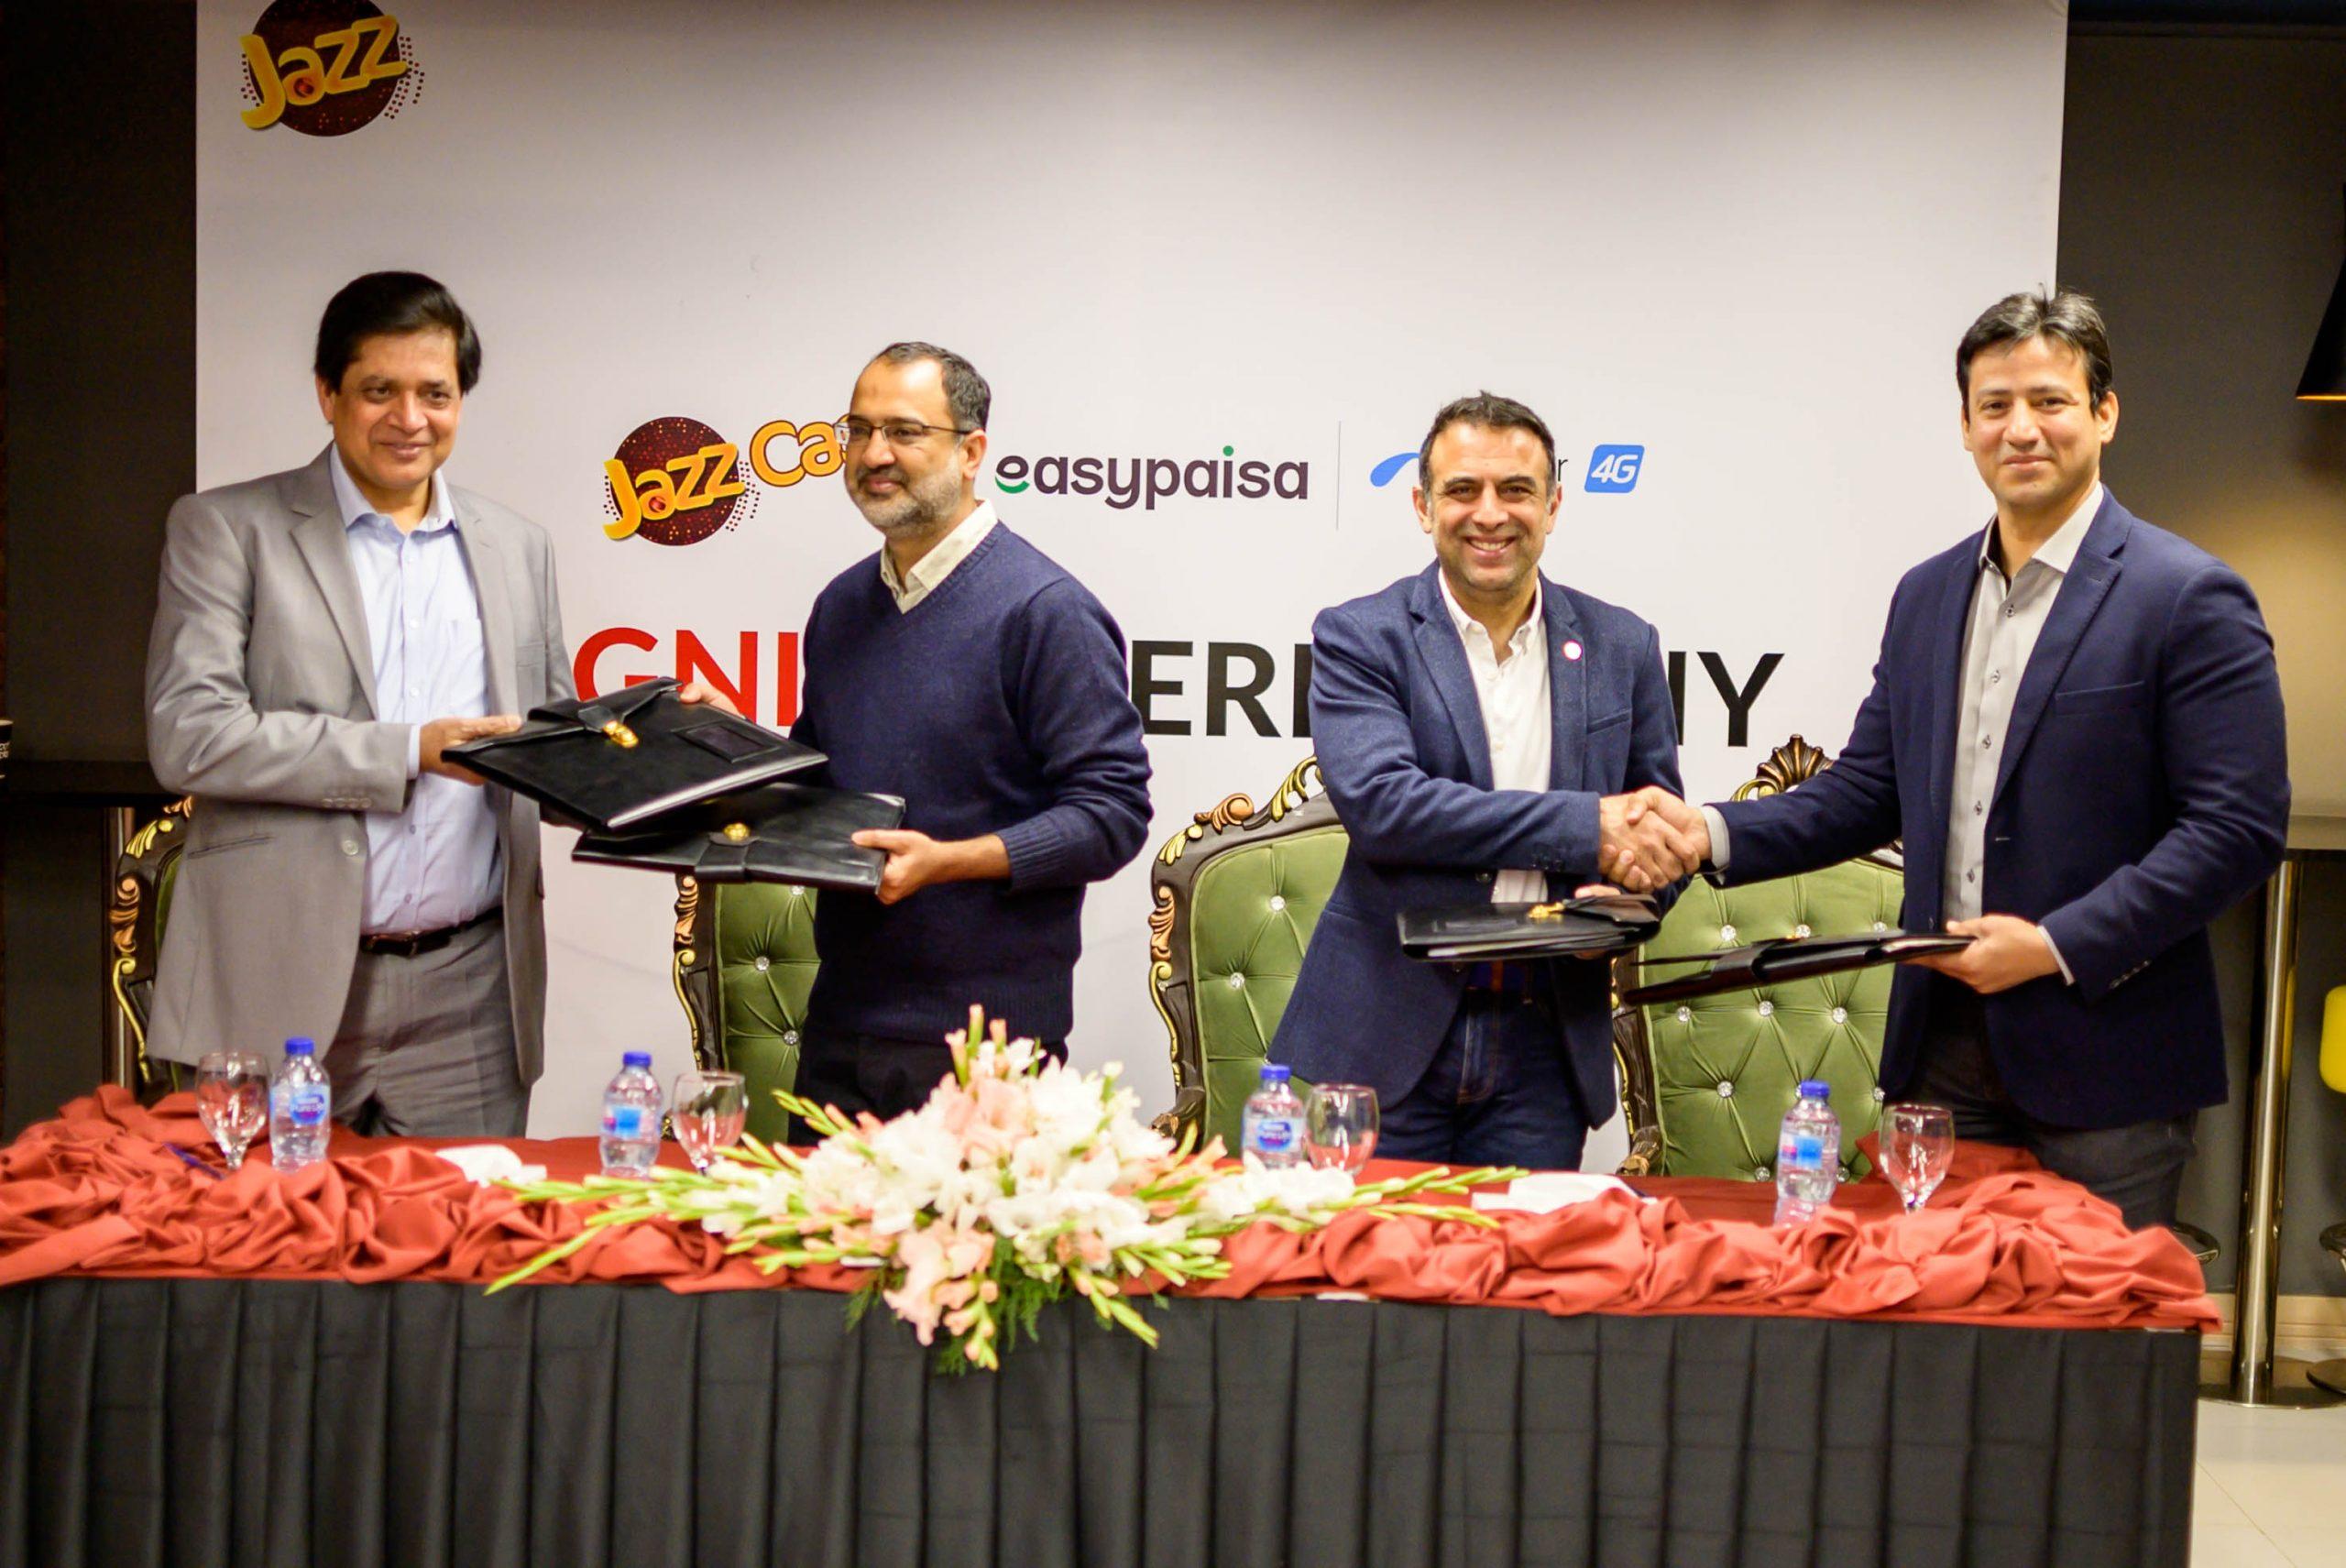 Jazz and Telenor Join Hands to Optimize Customer Experience